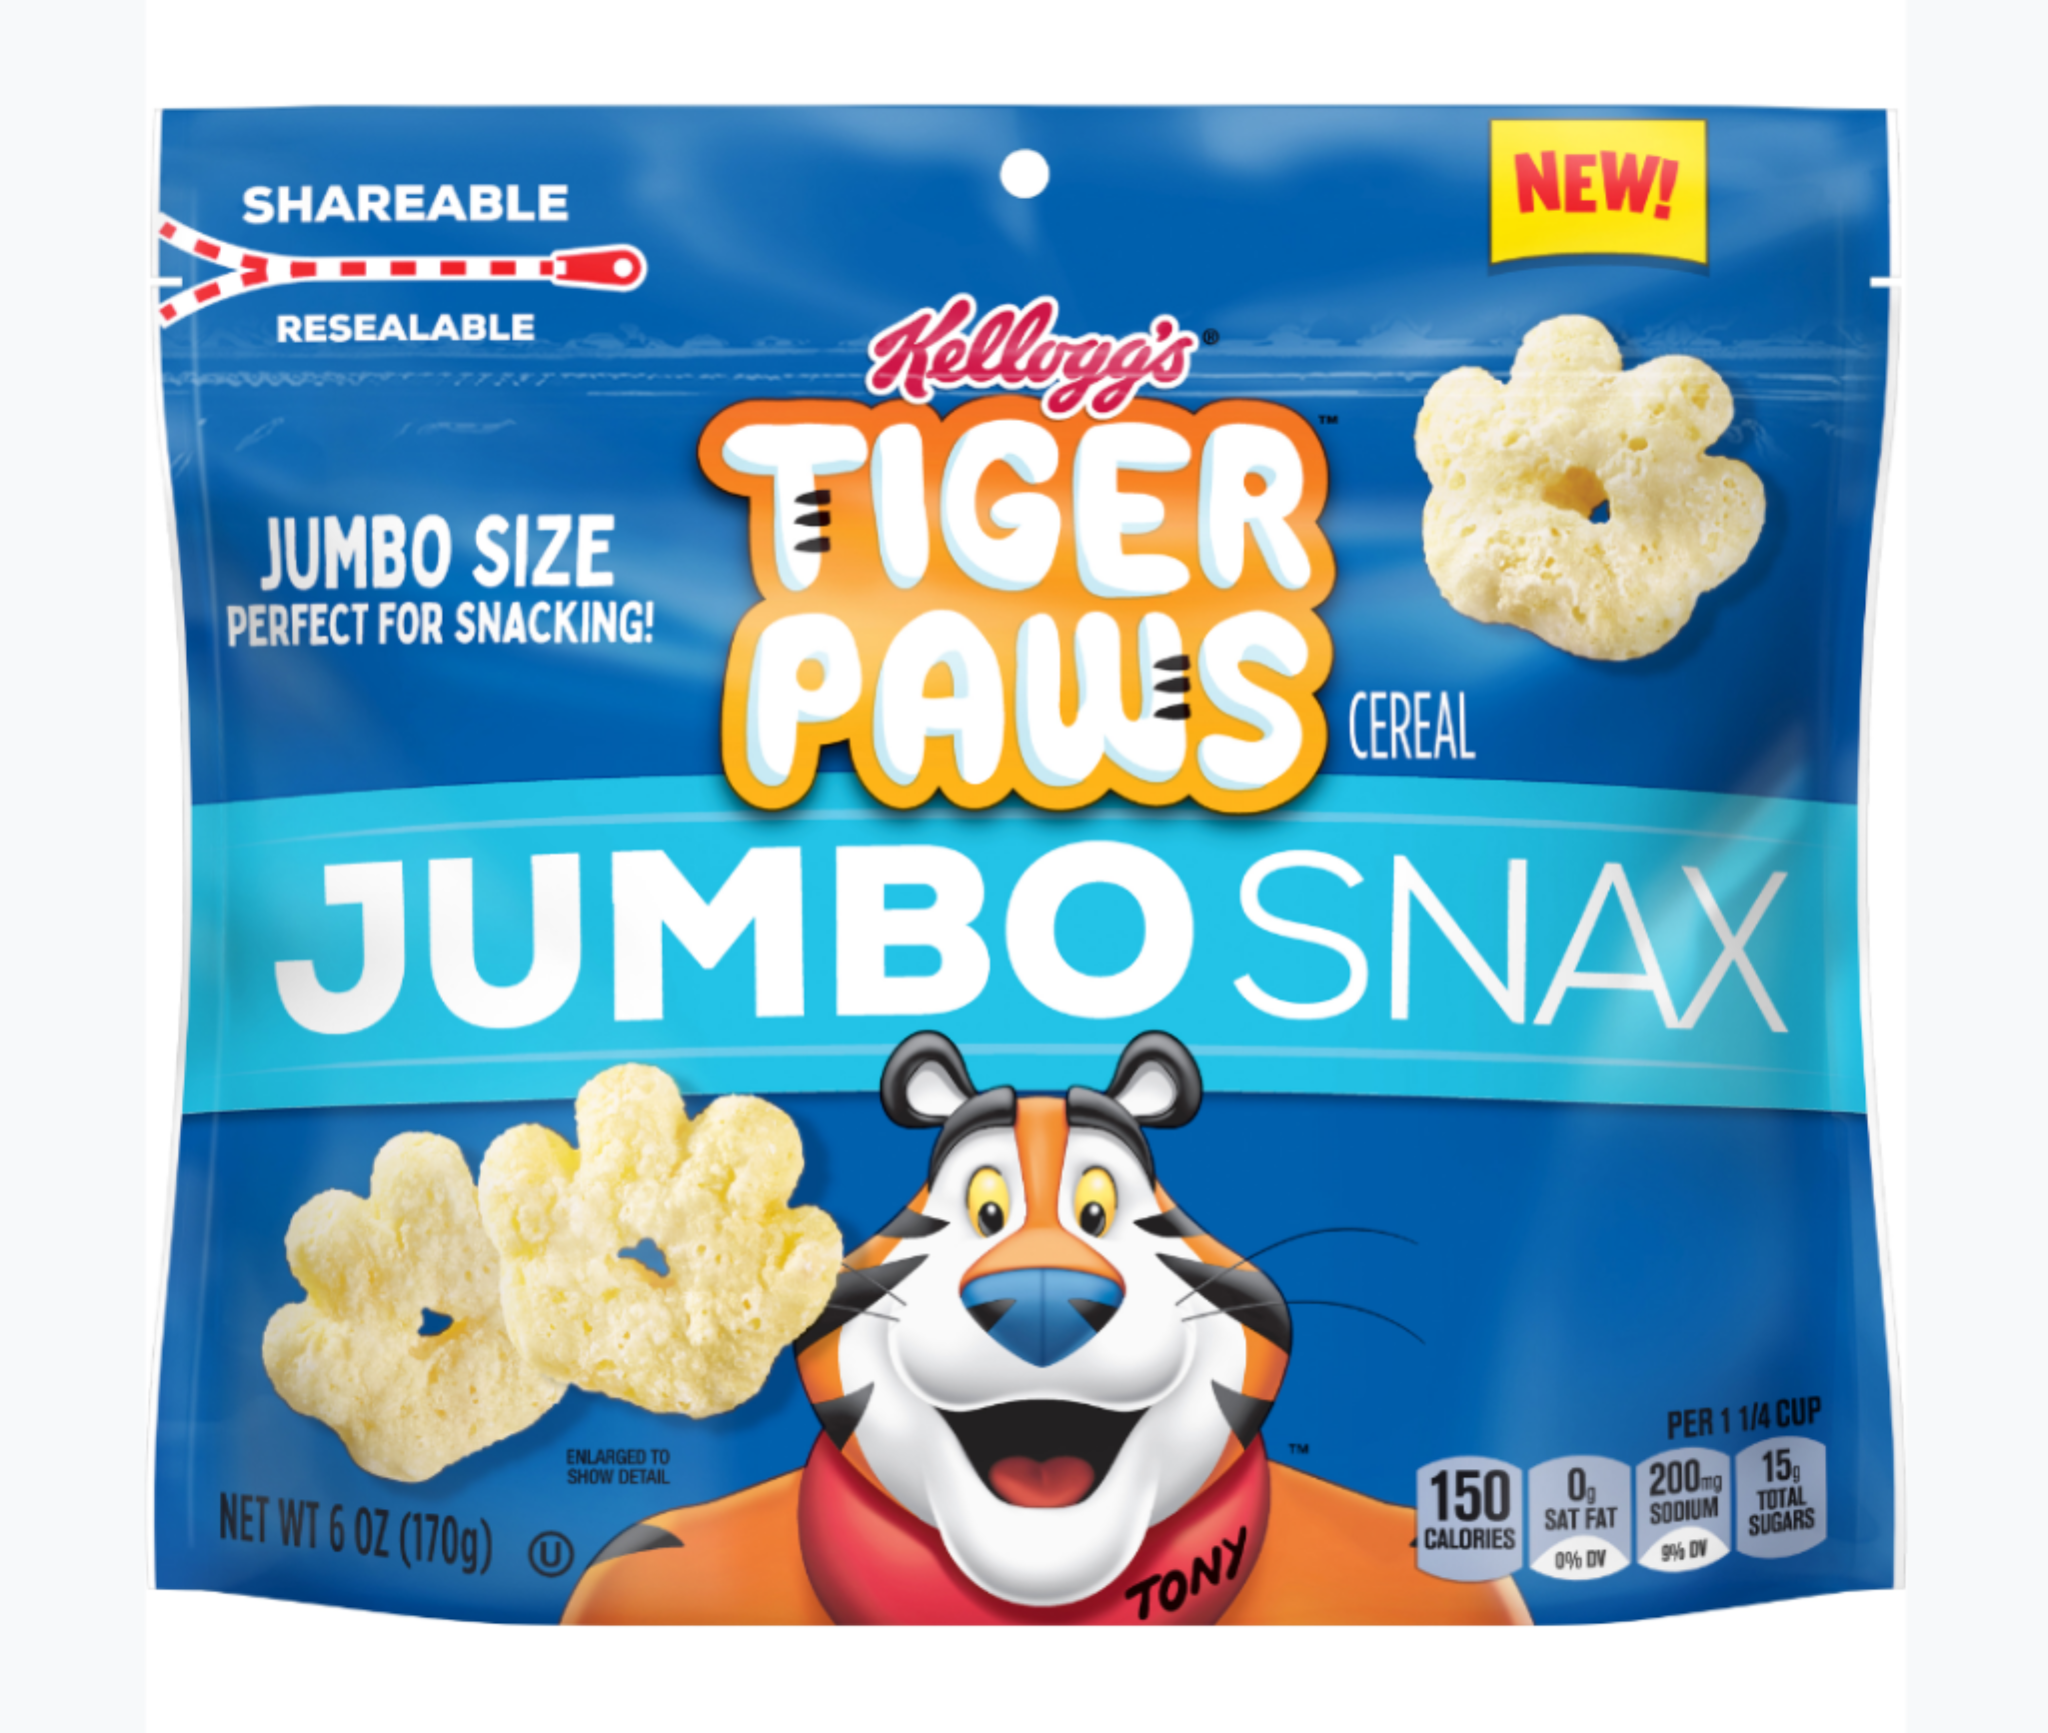 Kellogg's JUMBO SNAX Frosted Flakes Tiger Paws